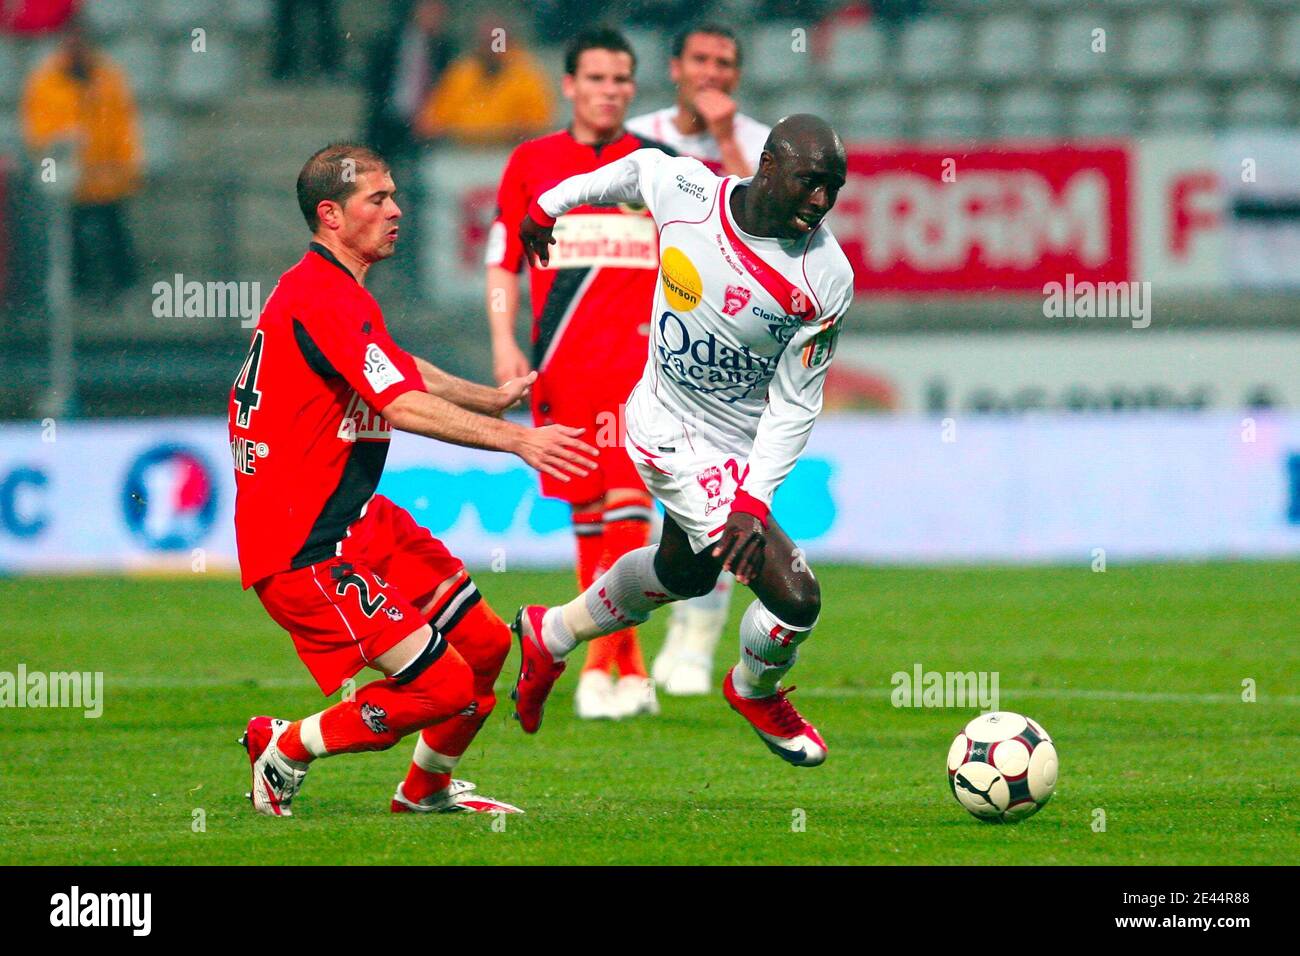 Lorient's Christophe Jallet tackles Nancy's Issiar Dia during the French First League soccer match, AS Nancy-lorraine vs FC Lorient at Marcel Picot stadium in Nancy, France on May 13, 2009. Photo by Mathieu Cugnot/ABACAPRESS.COM Stock Photo